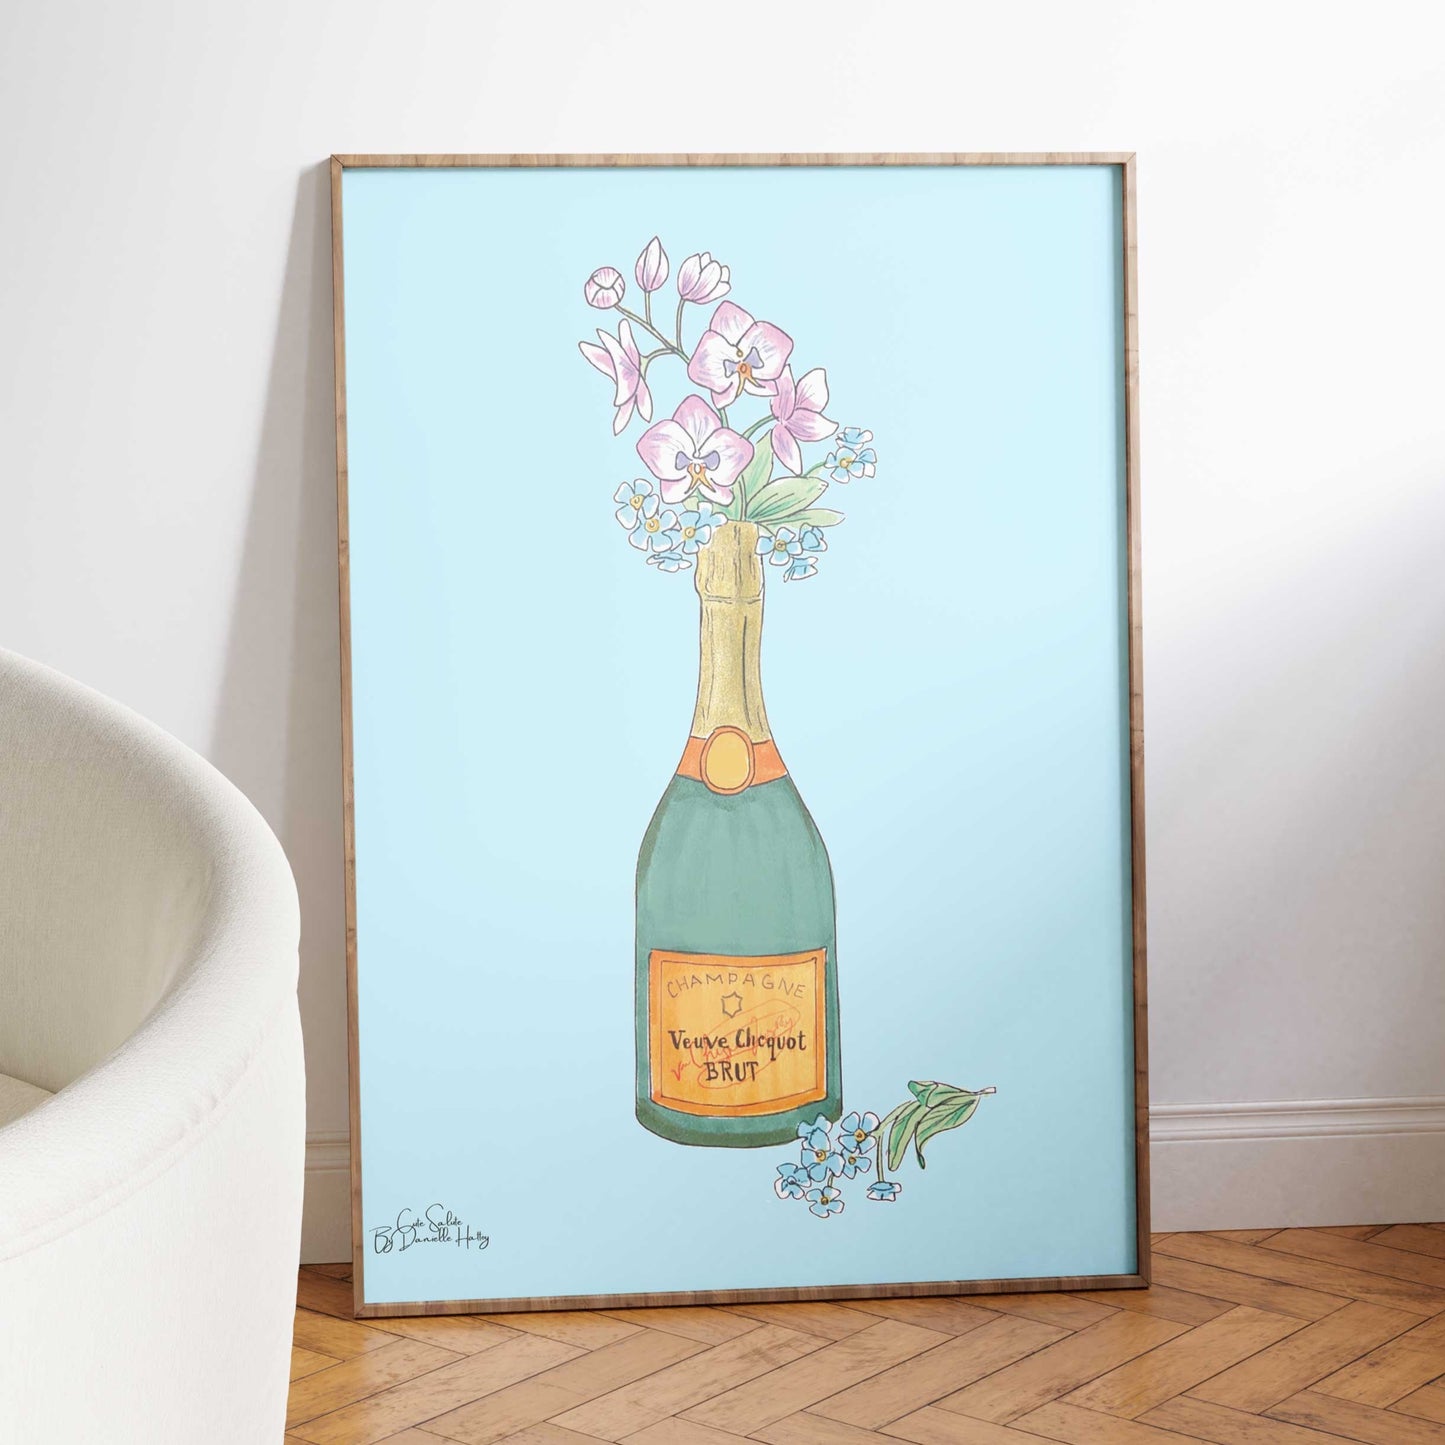 Orchid Champagne Illustrated Wall Art Print